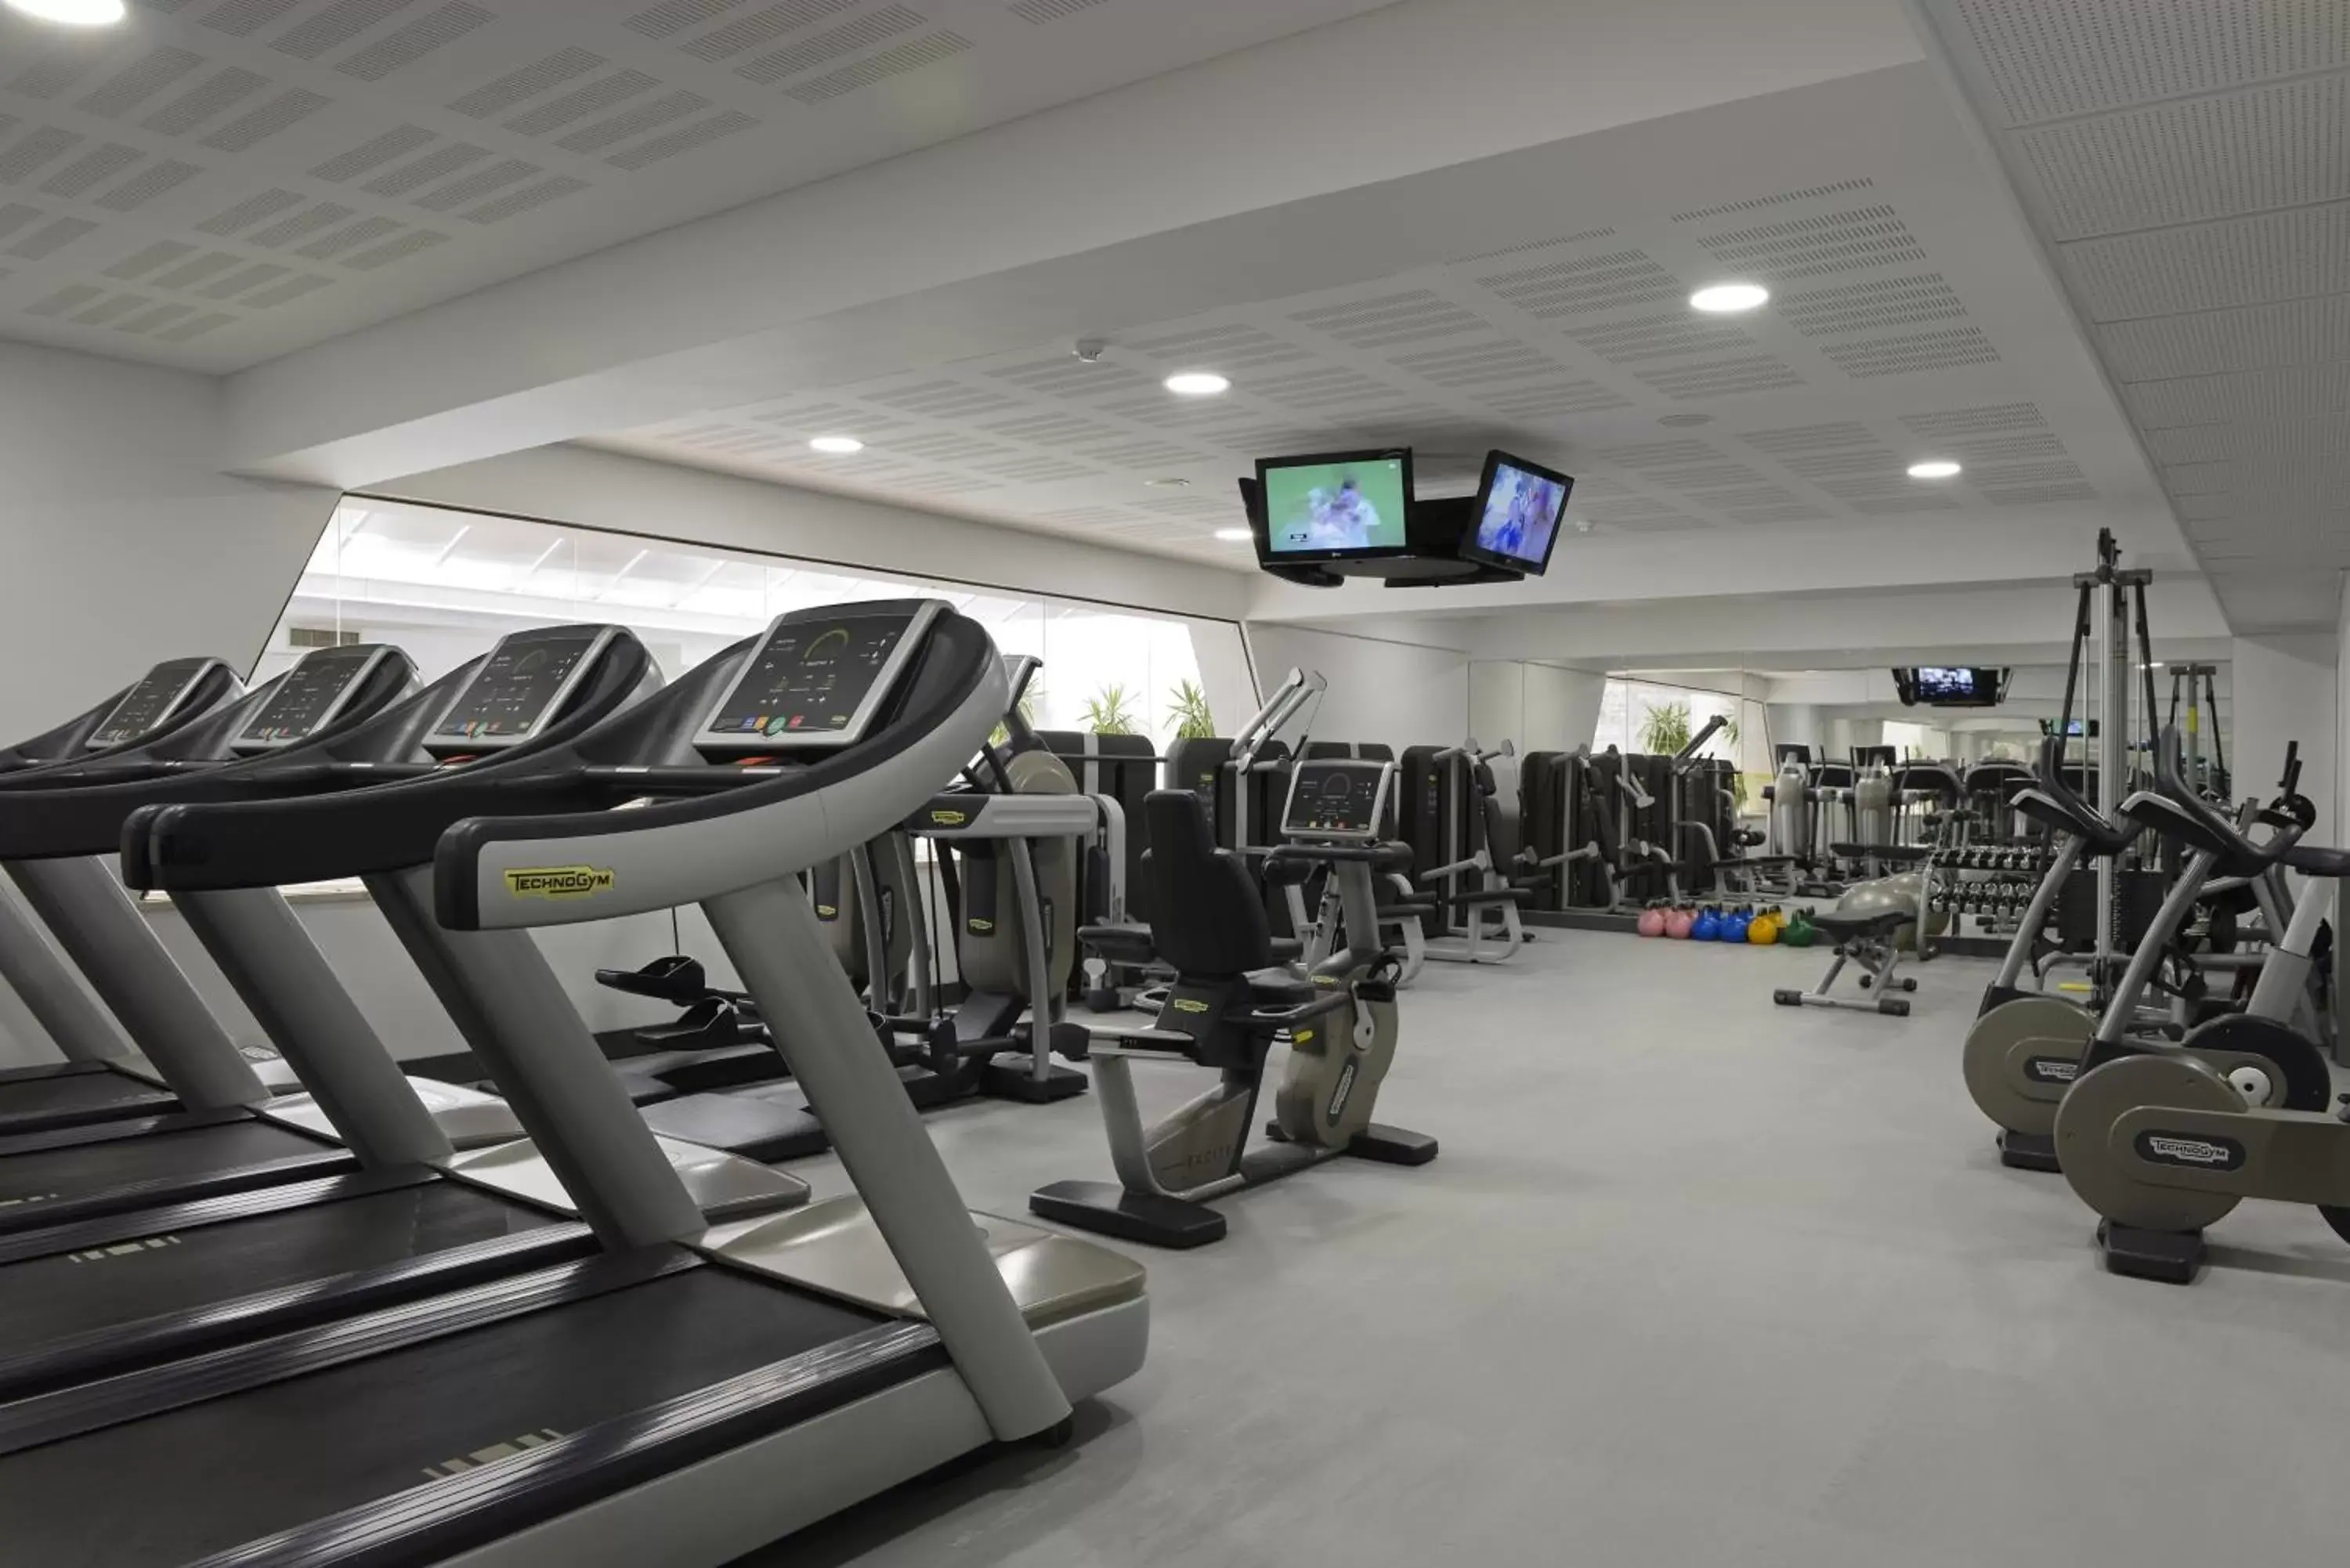 Fitness centre/facilities, Fitness Center/Facilities in Altis Grand Hotel